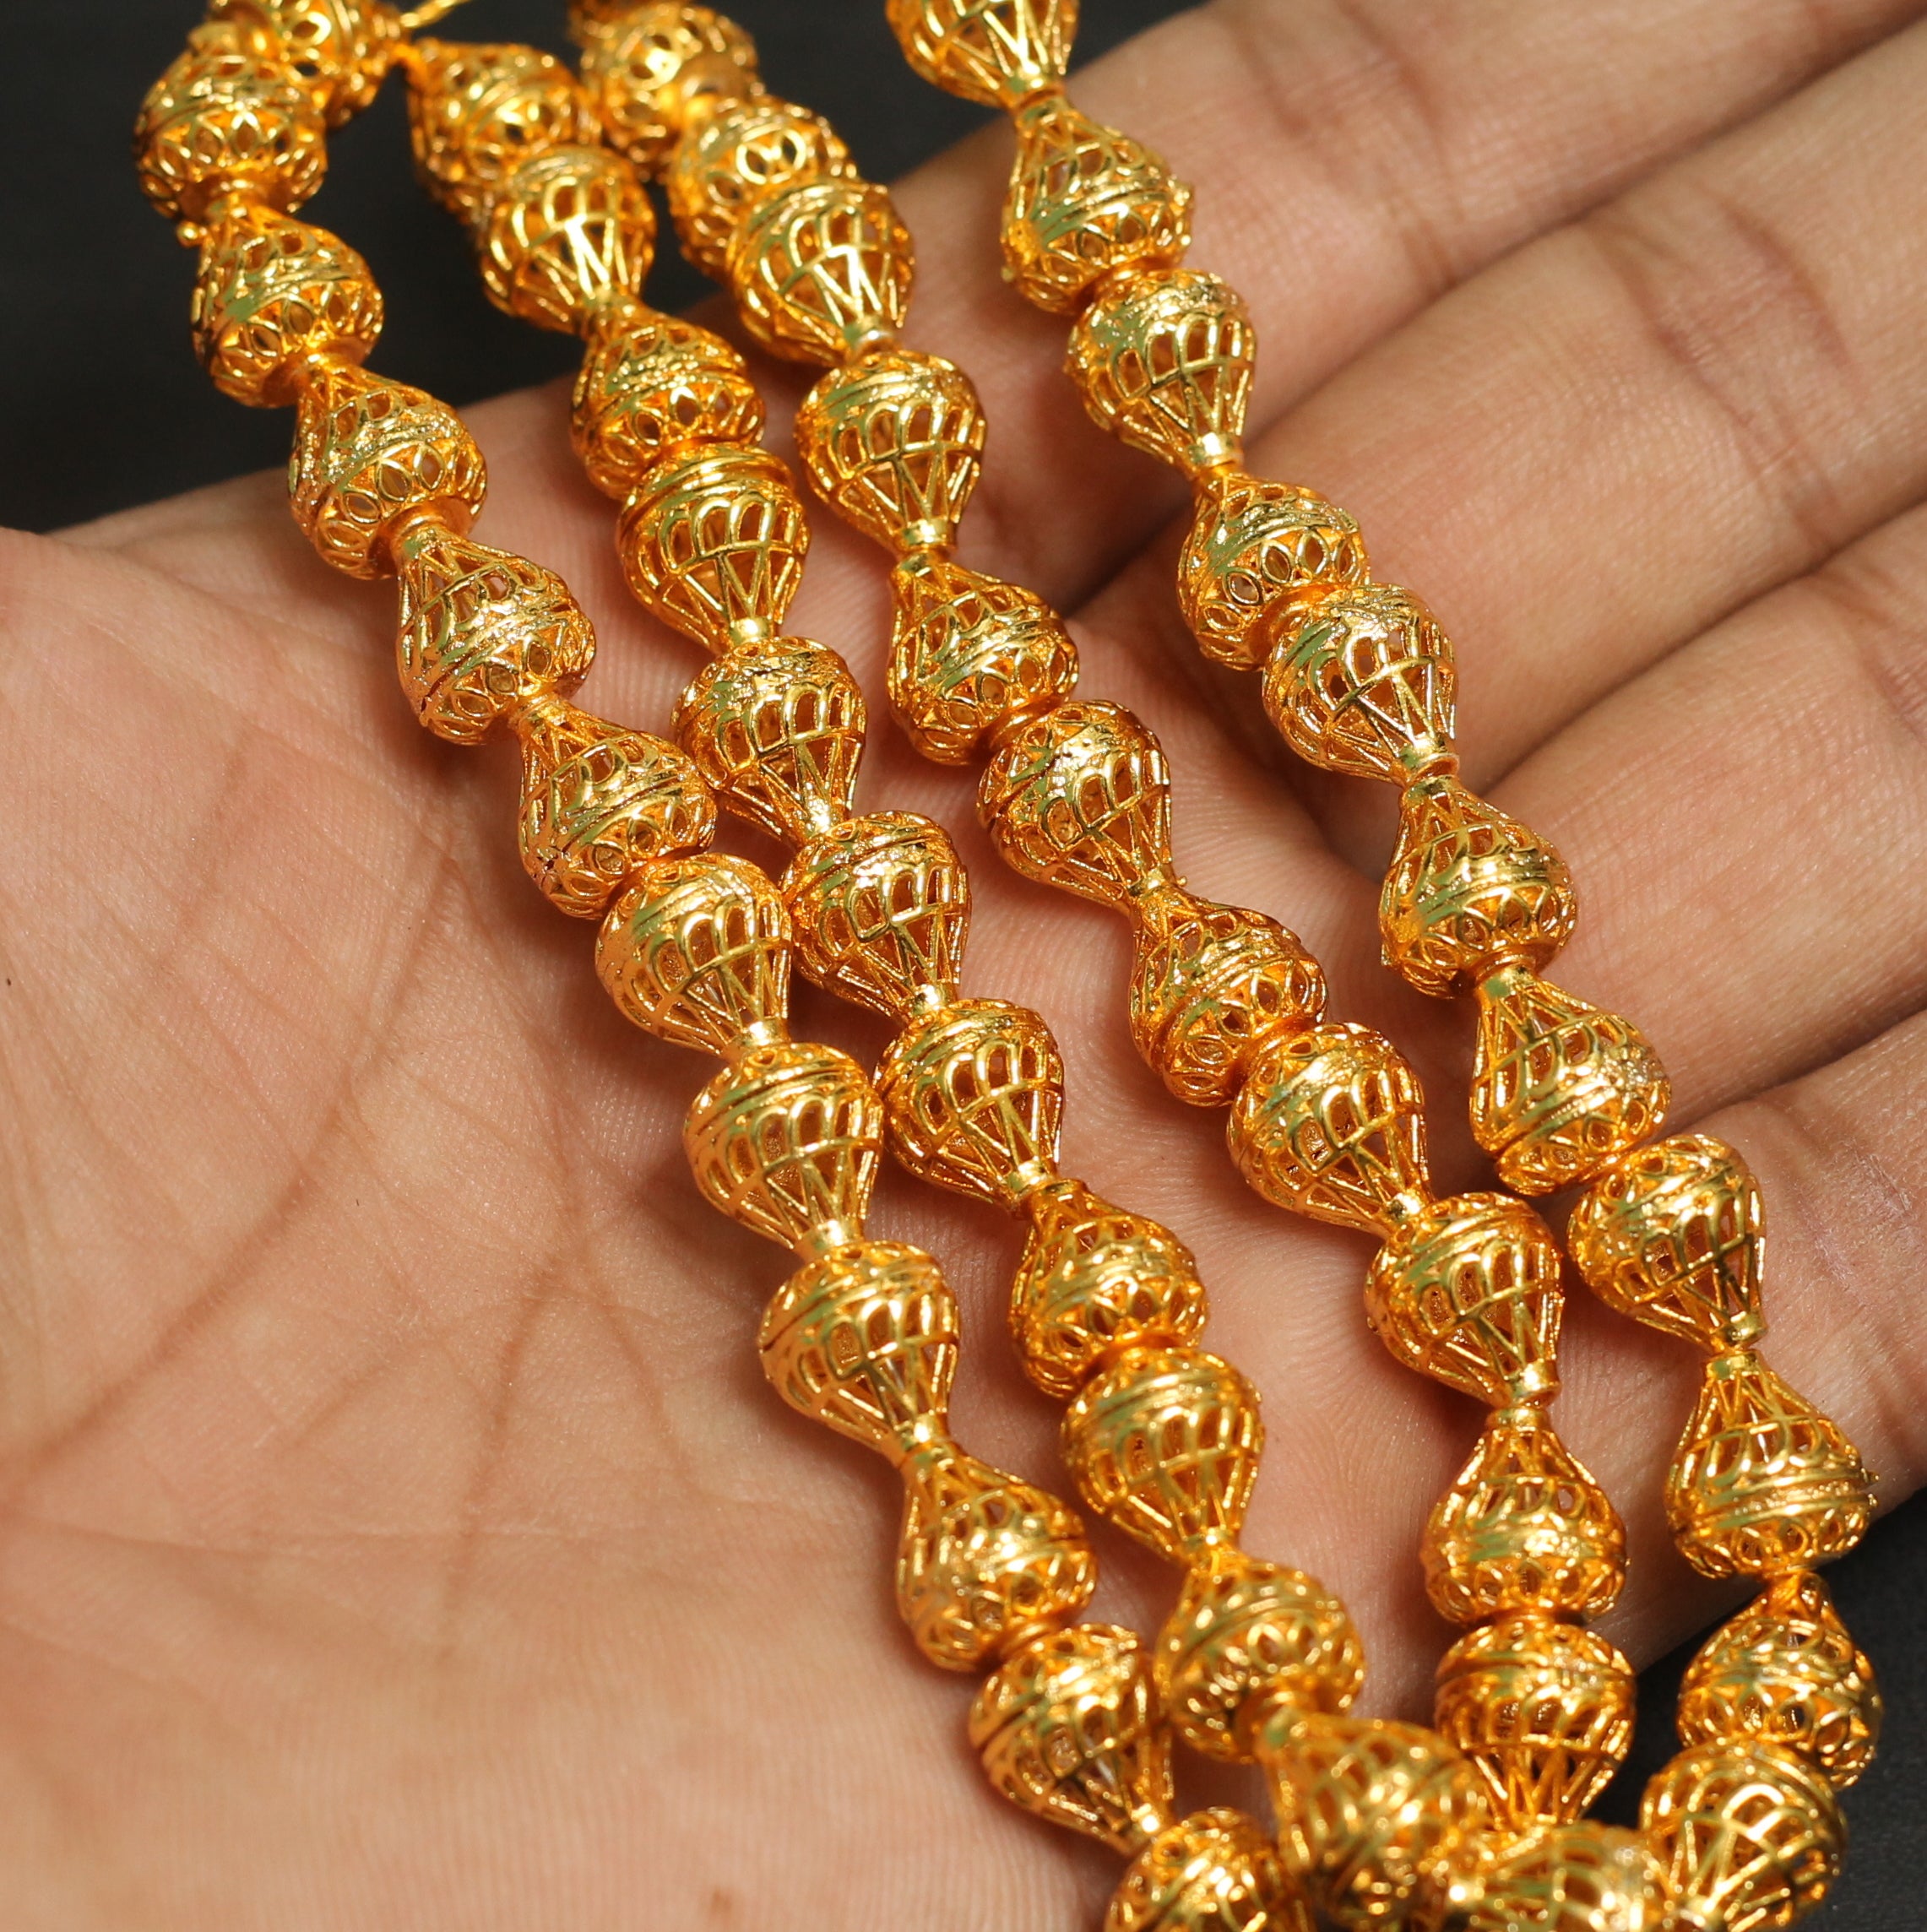 9x8mm Gold Plated Magnetic Clasp